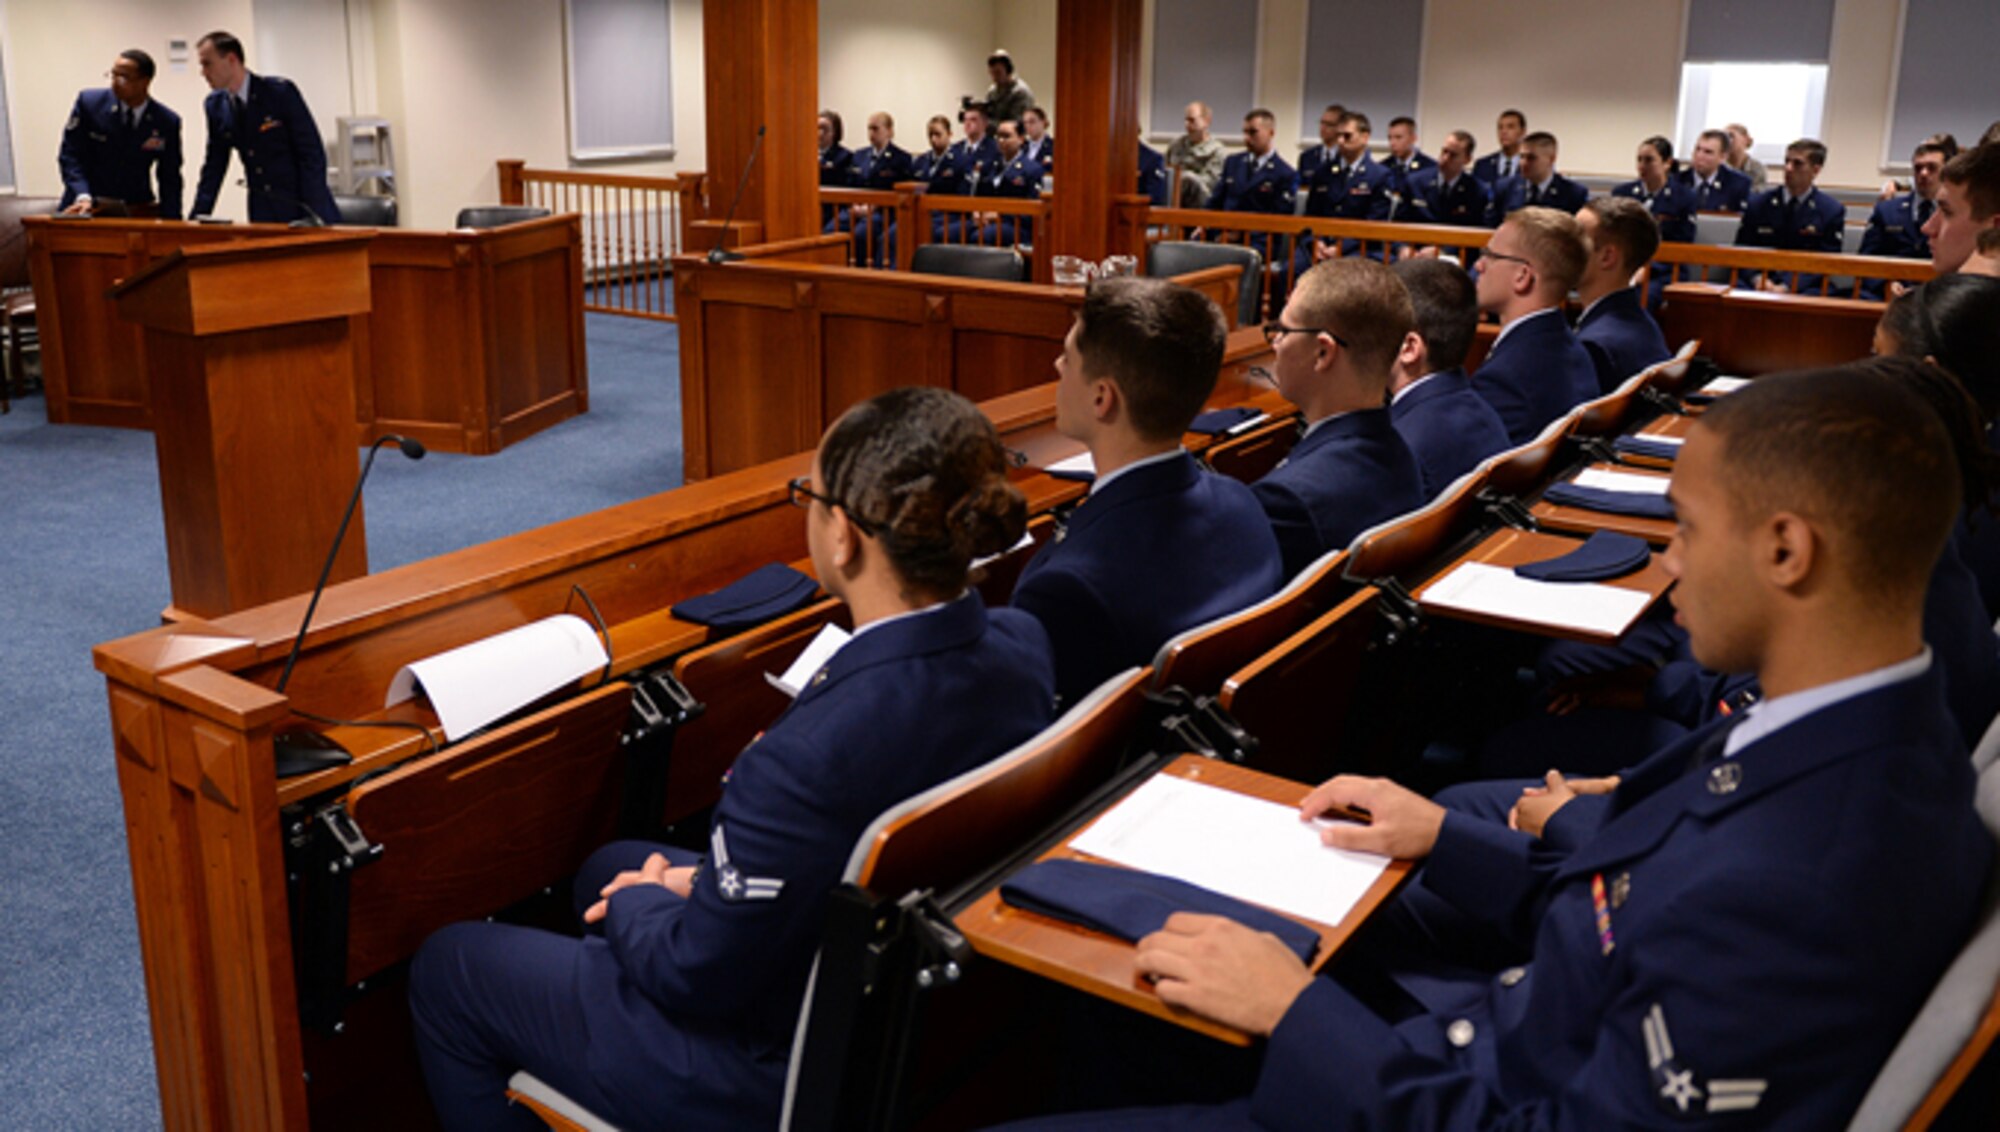 Airmen fill the 52nd Fighter Wing legal office courtroom during the "Got Consent?" training Oct. 24, 2013. "Got Consent?" is an interactive training session that allows first-term Airmen to participate as jurors in a sexual assault case. Legal office personnel broadcasted pre-recorded interviews from the plaintiff and defendant before the jury panel as part of the training’s program. 